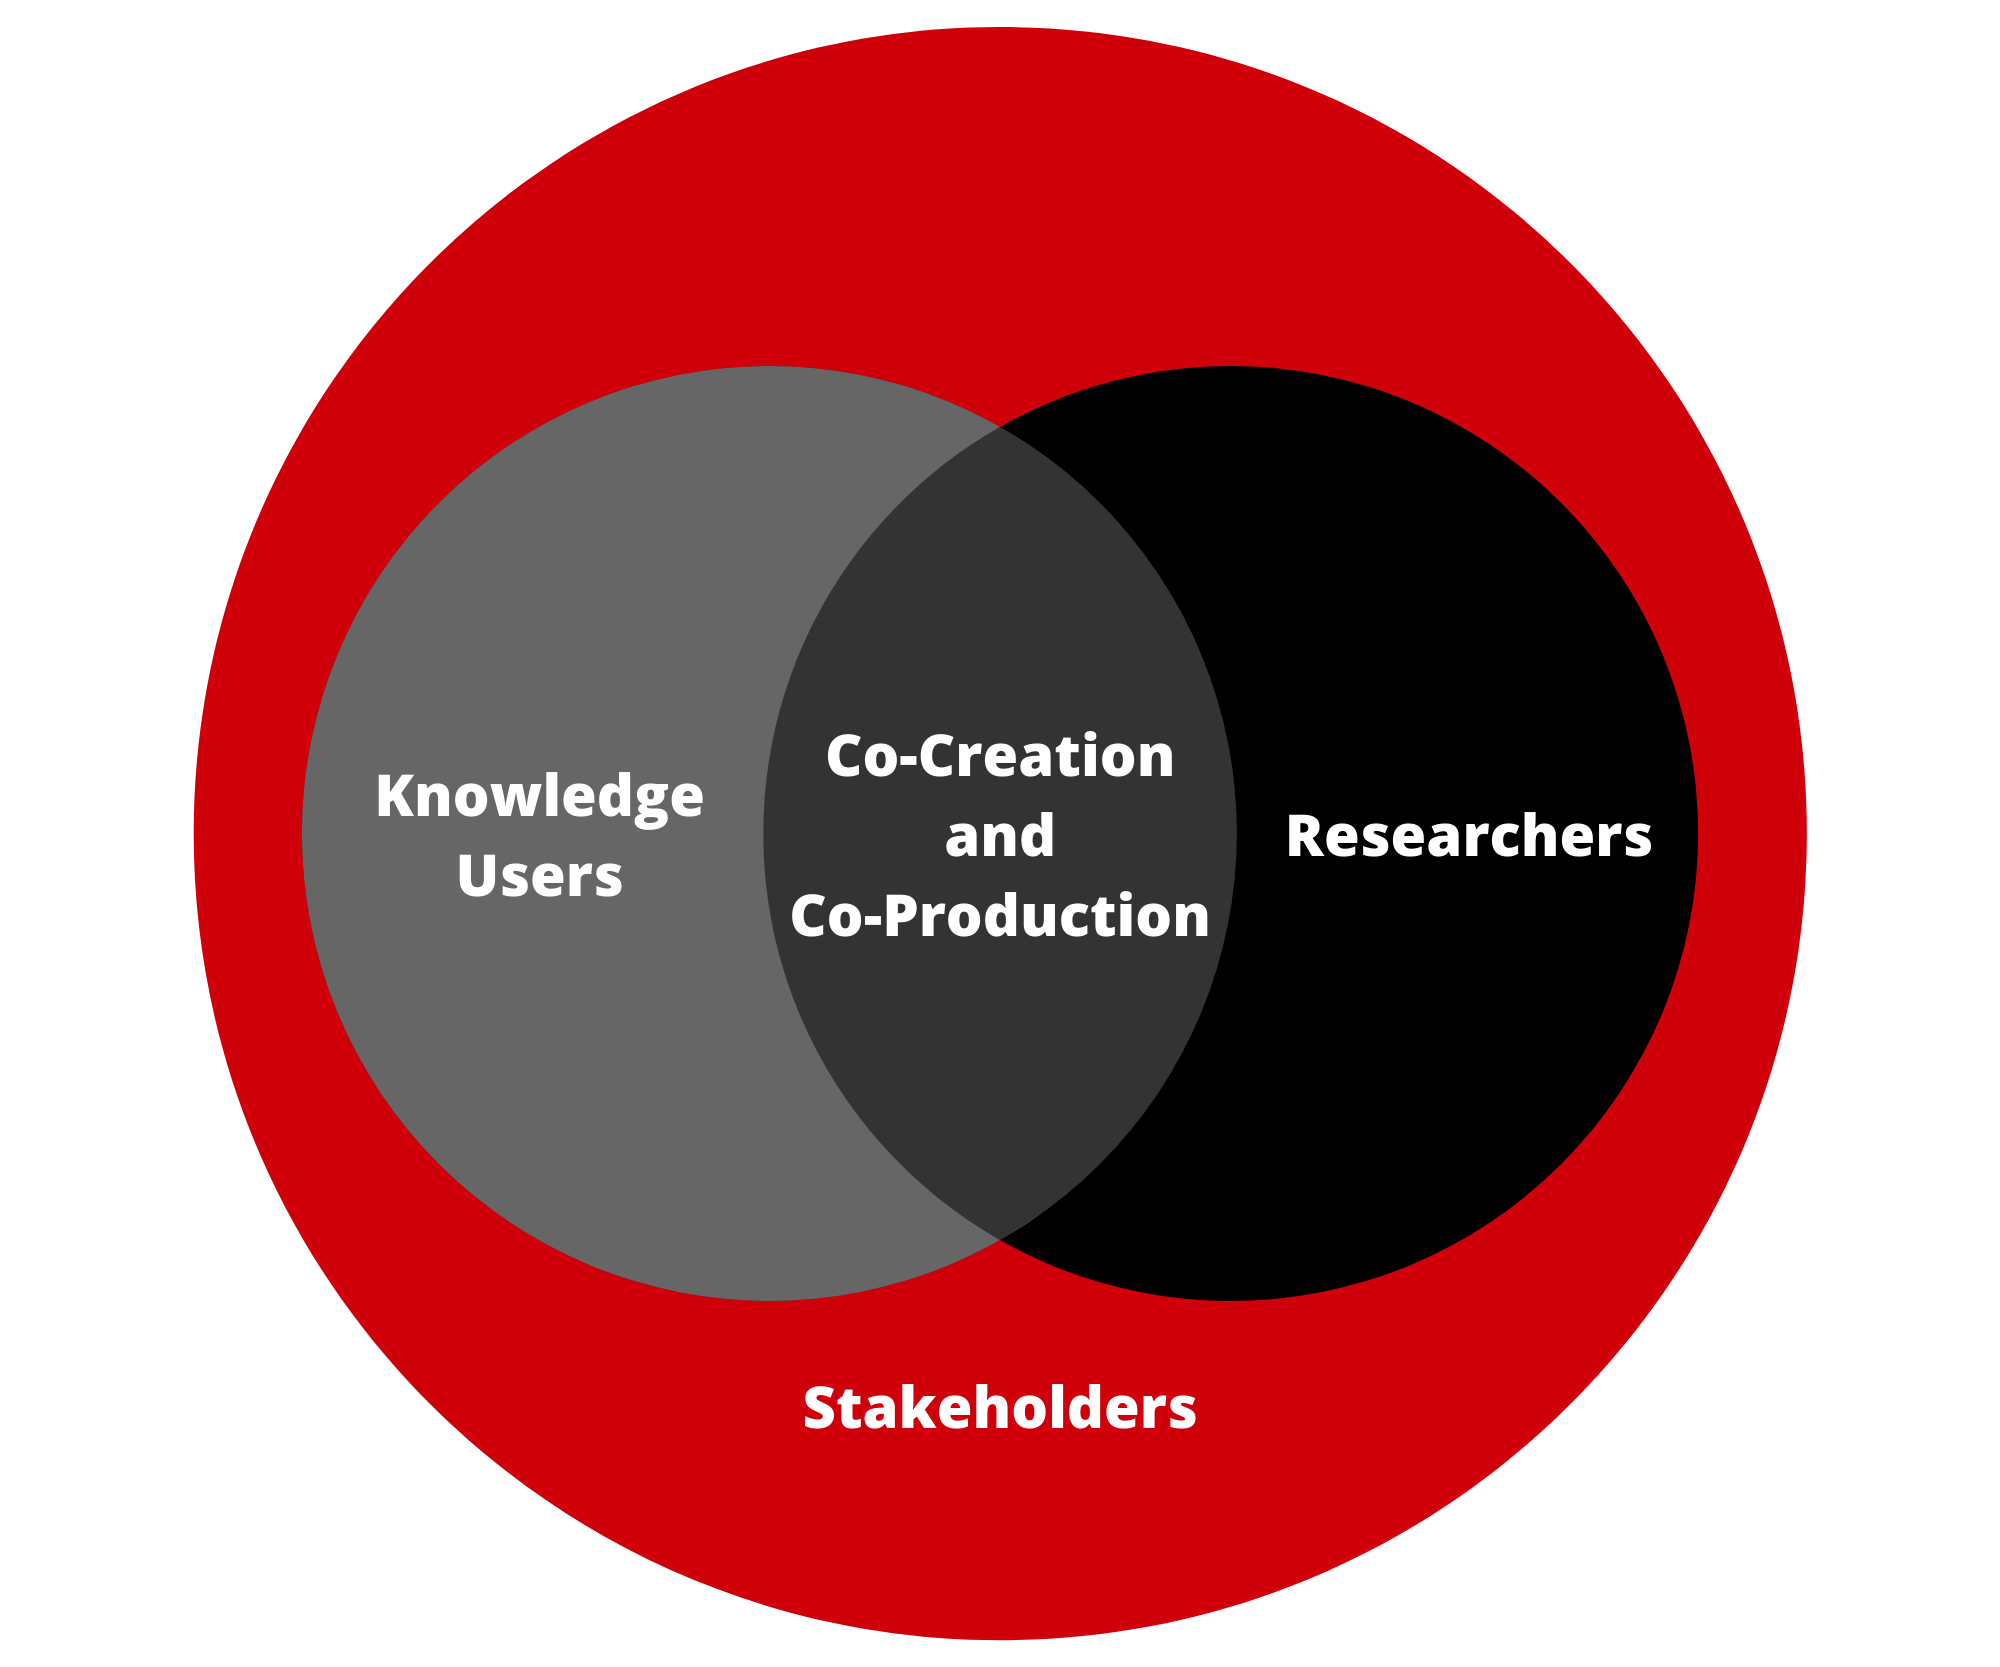 Illustration of a Venn diagram, with knowledge users in one circle, researchers in another circle, co-creation and co-prodution in the middle, and an outer circle consisting of stakeholders